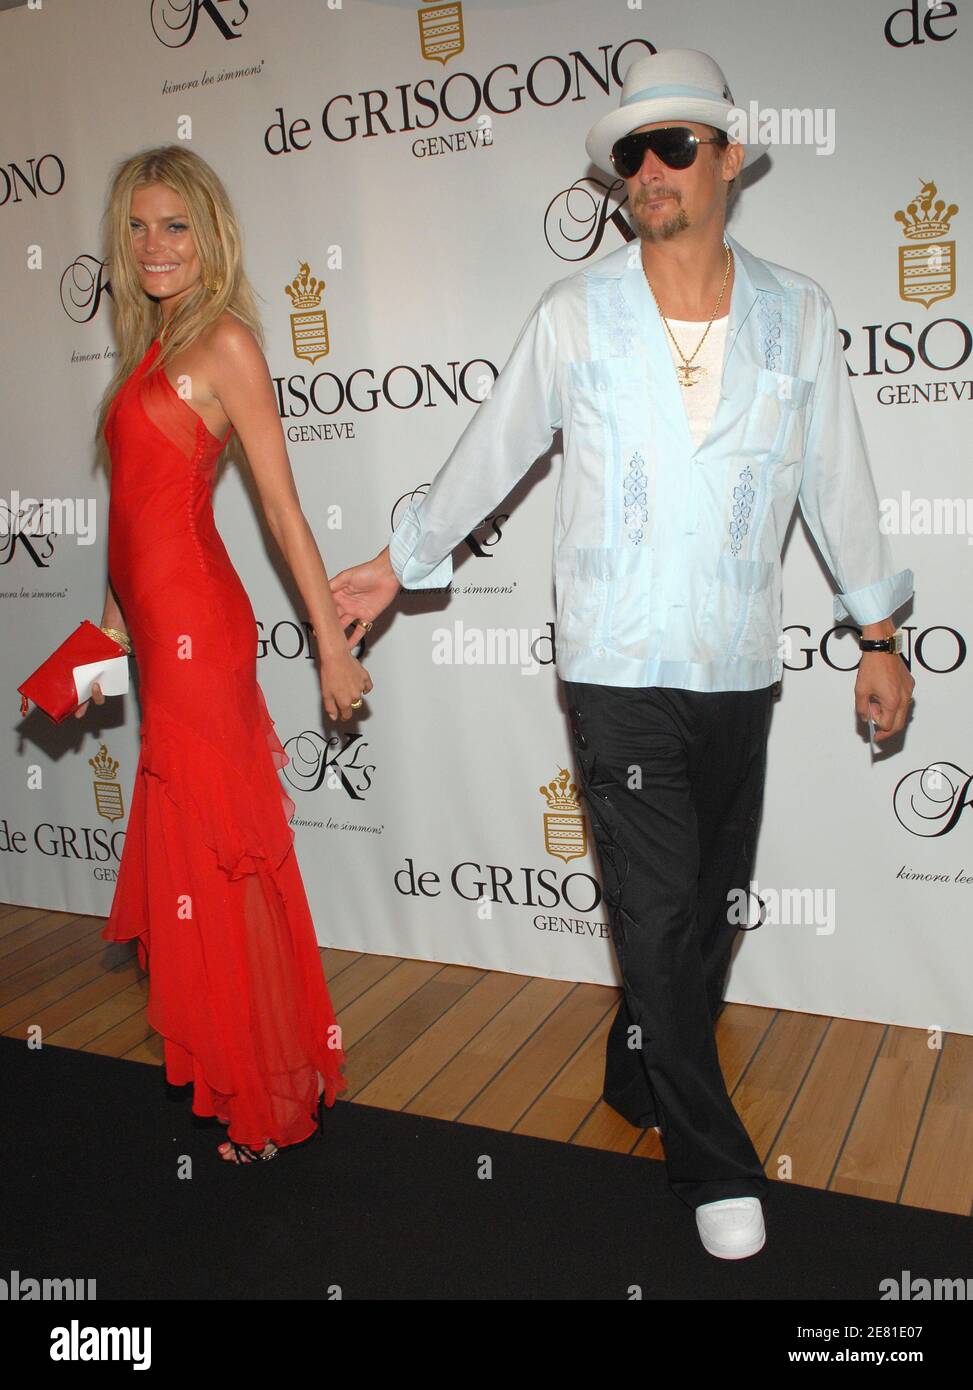 Musician Kid Rock (R) and girlfriend May Andersen attend the De Grisogono party at Eden Rock during the 60th International Cannes Film Festival on May 22, 2007 in Cap d'Antibes, France. Photo by Hahn-Nebinger-Orban/ABACAPRESS.COM Stock Photo